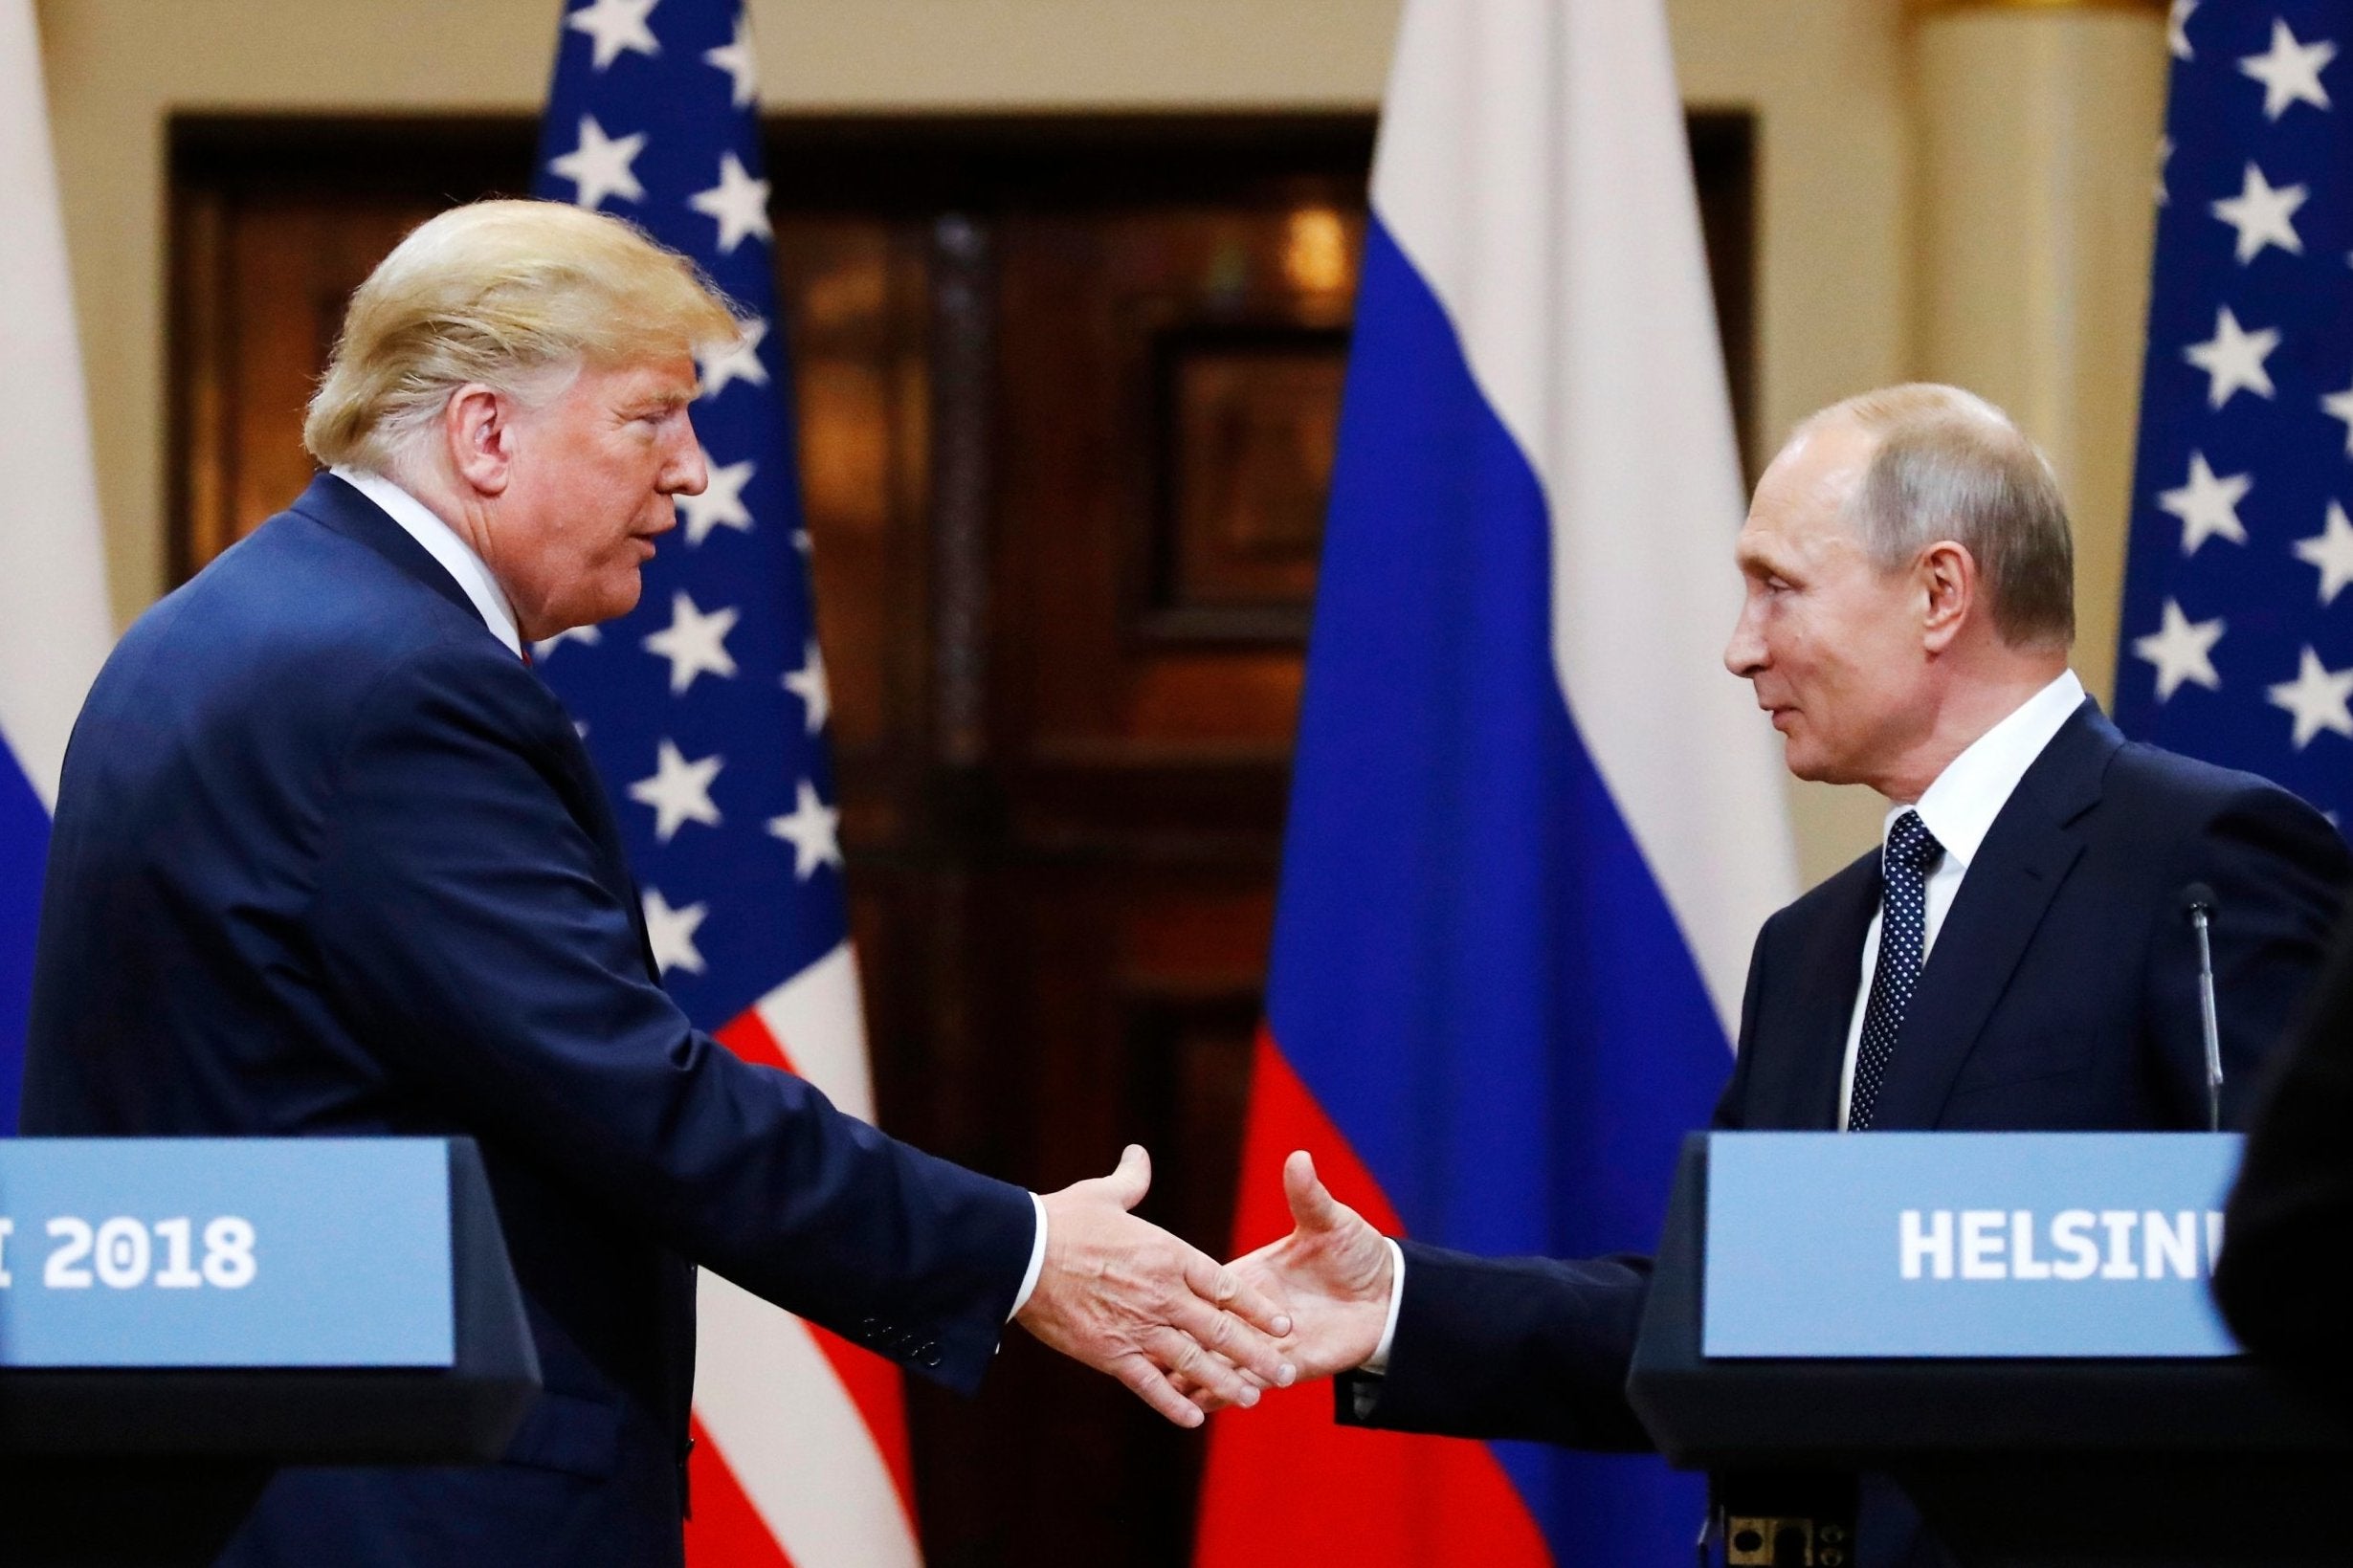 Pictured: President Donald Trump shakes hand with Russian President Vladimir Putin after their meeting at the Presidential Palace, Helsinki, Finland, 16 July 2018.